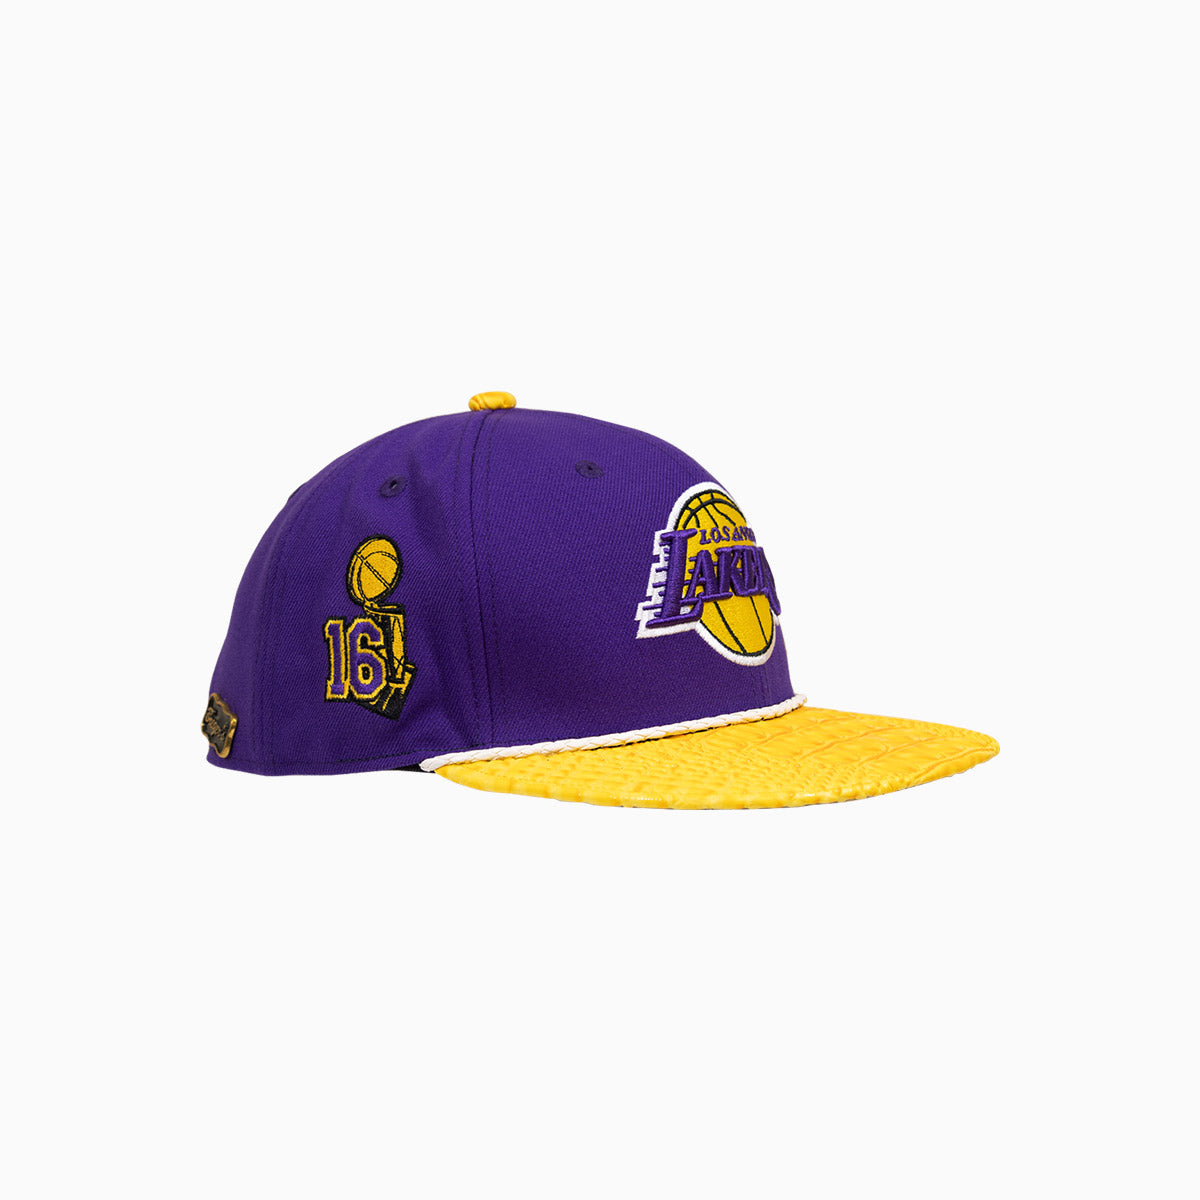 Breyer's Buck 50 Los Angeles Lakers Hat With Leather Visor